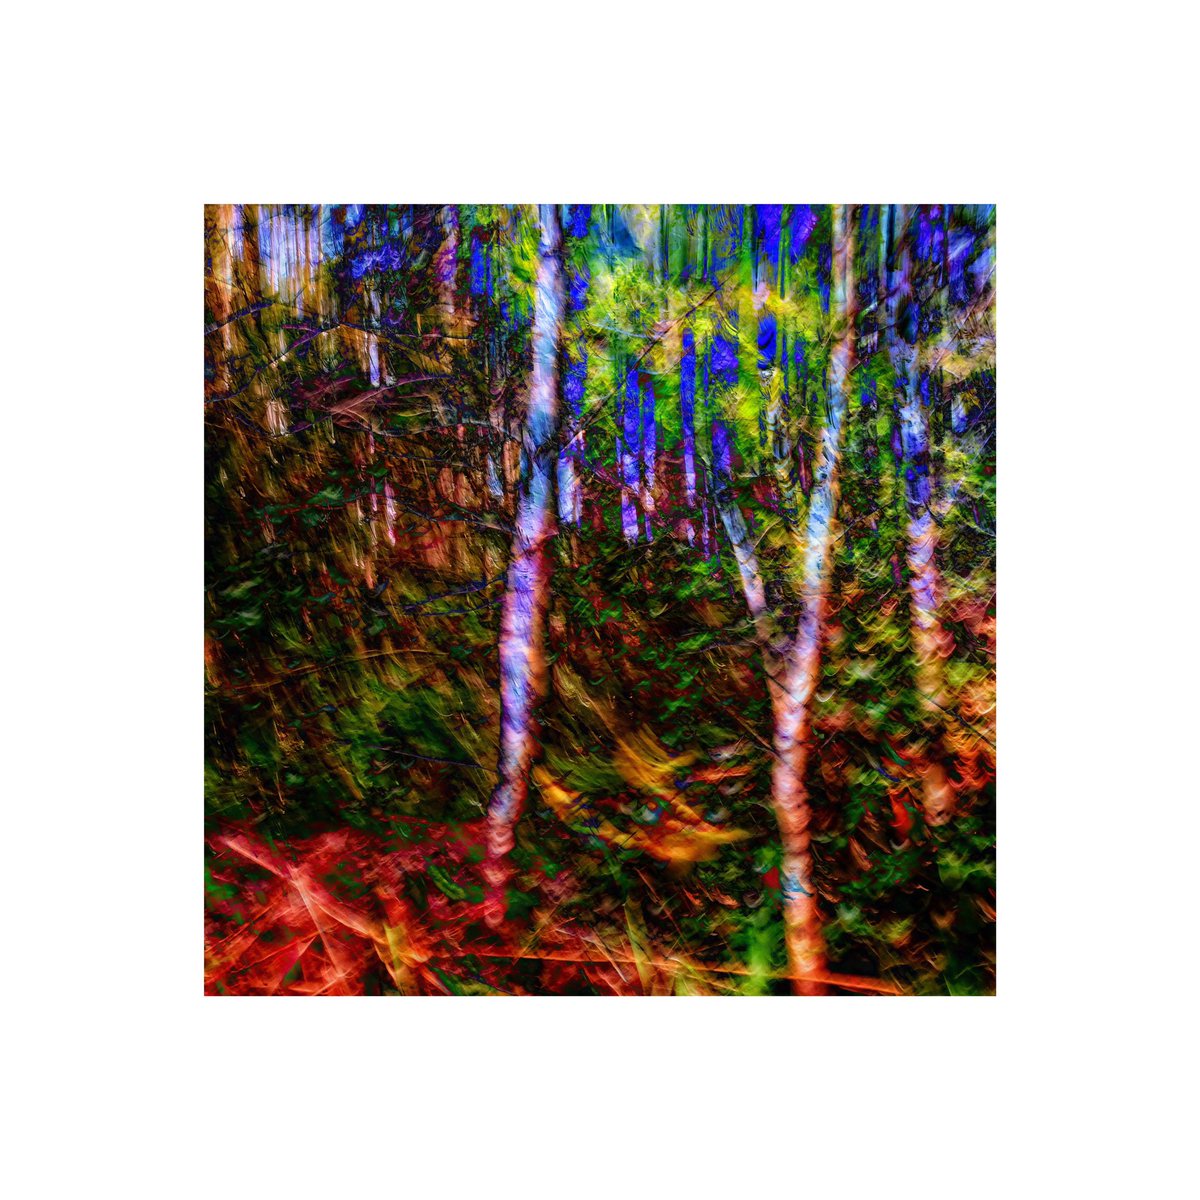 Day 152 365 days of ICM  photography 
#icmphotography #icm #intentionalcameramovement #abstractphotography #abstract #icmphoto #icmphotomag #impressionistphotography #bluronpurpose #camerapainting #365in2023